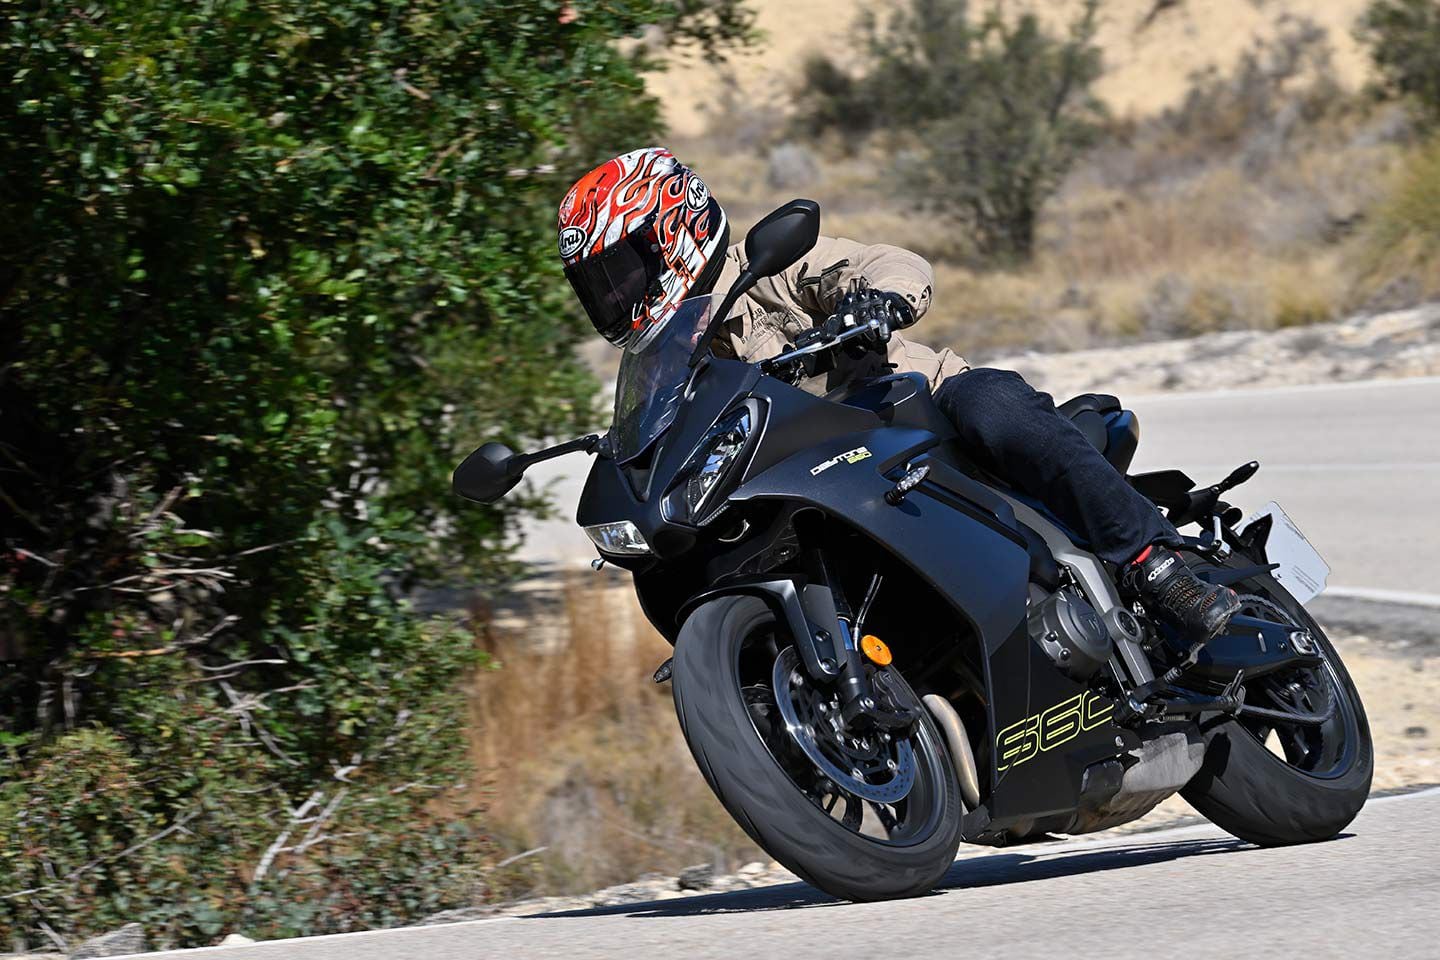 The 2025 Triumph Daytona 660 has arrived and we rode it in Spain.